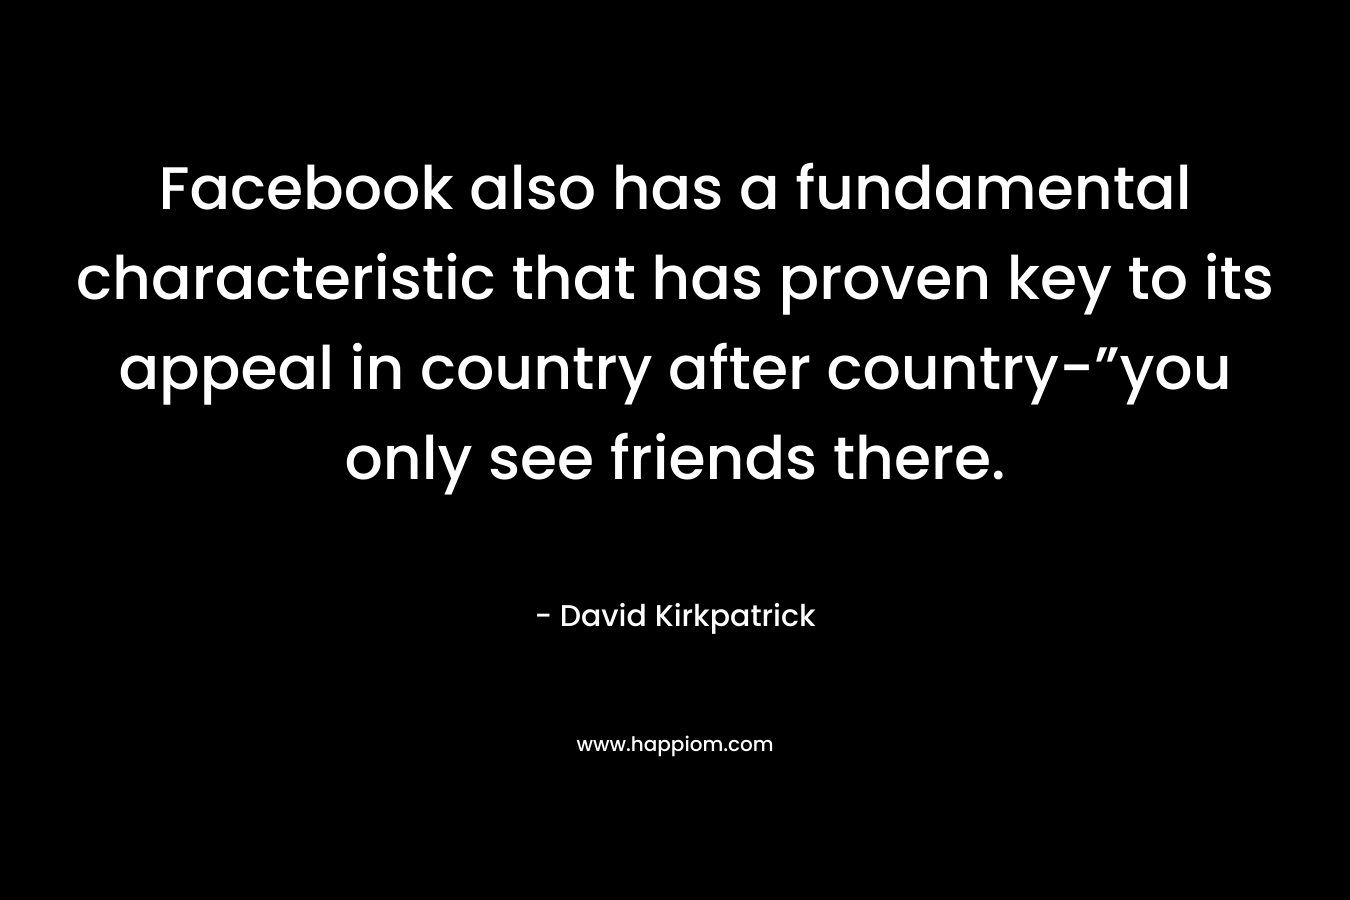 Facebook also has a fundamental characteristic that has proven key to its appeal in country after country-”you only see friends there. – David Kirkpatrick